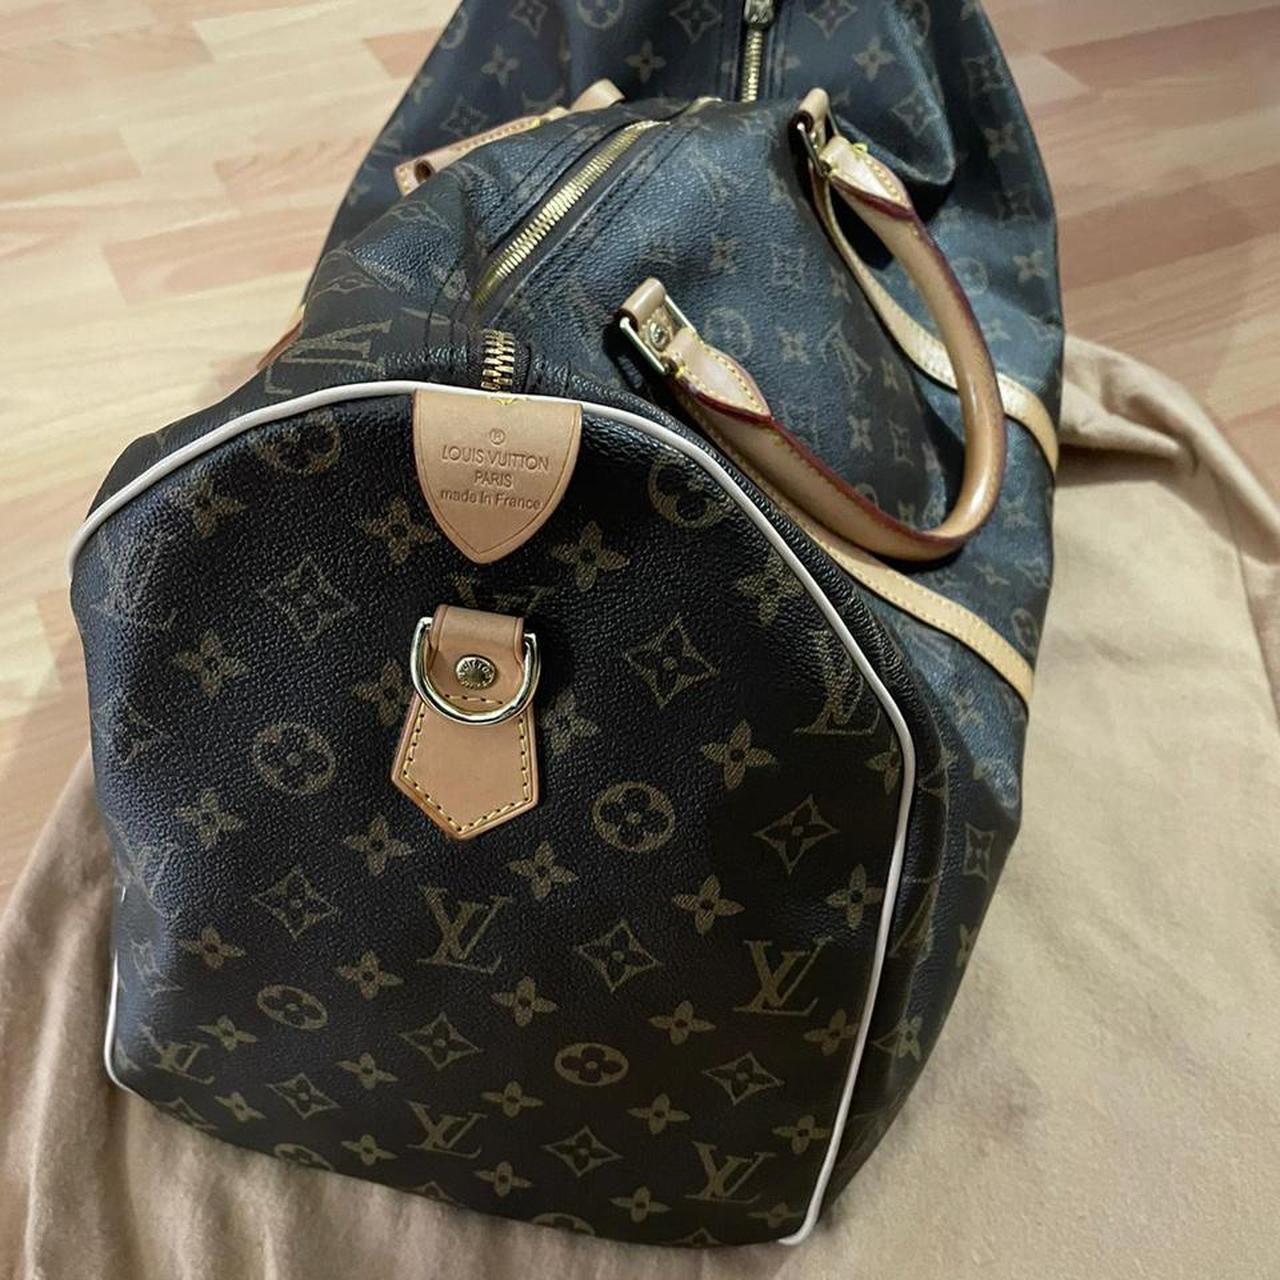 Classic LV duffle bag, hardly used. 100% authentic.